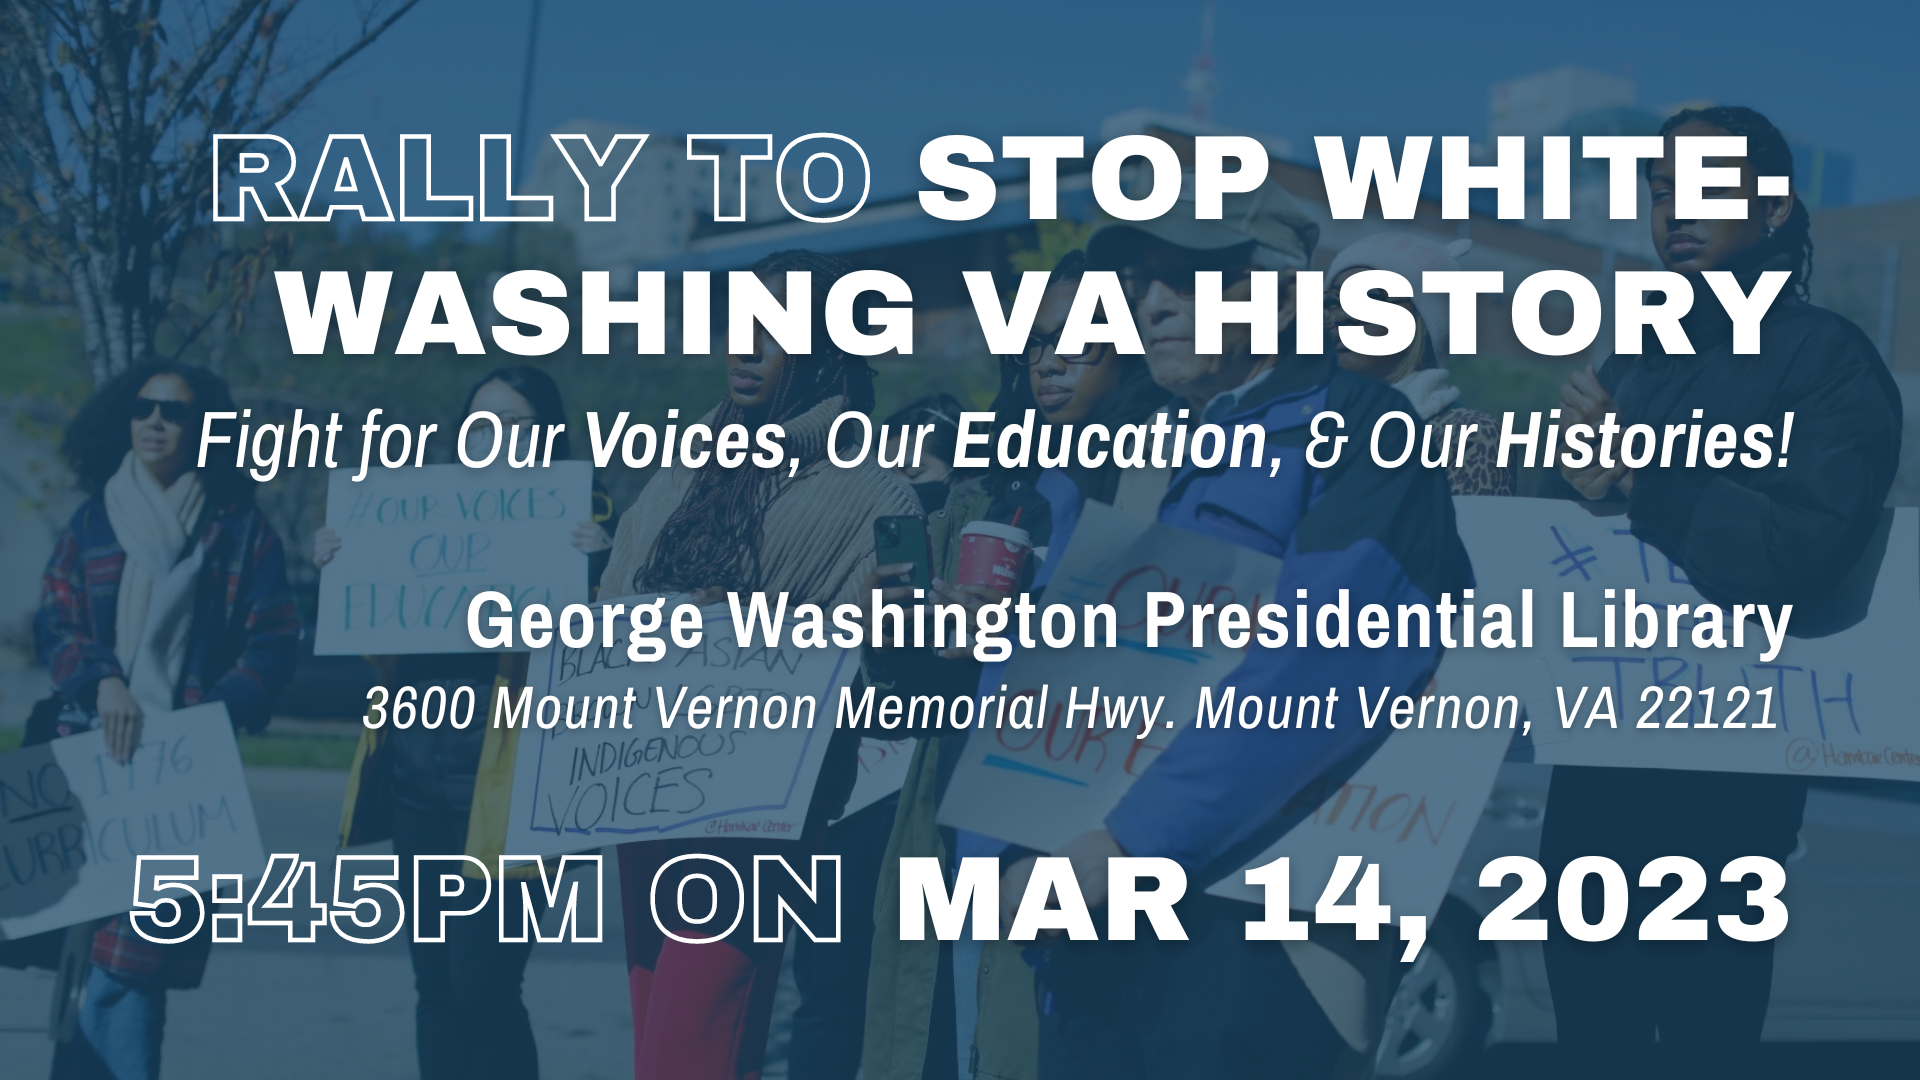 Rally to Stop Whitewashing Virginia History: Fight for Our Voices, Our Education & Our Histories!  George Washington Presidential Library (3600 Mount Vernon Memorial Hwy. Mount Vernon, VA 22121) 5:45pm on Mar 14, 2023